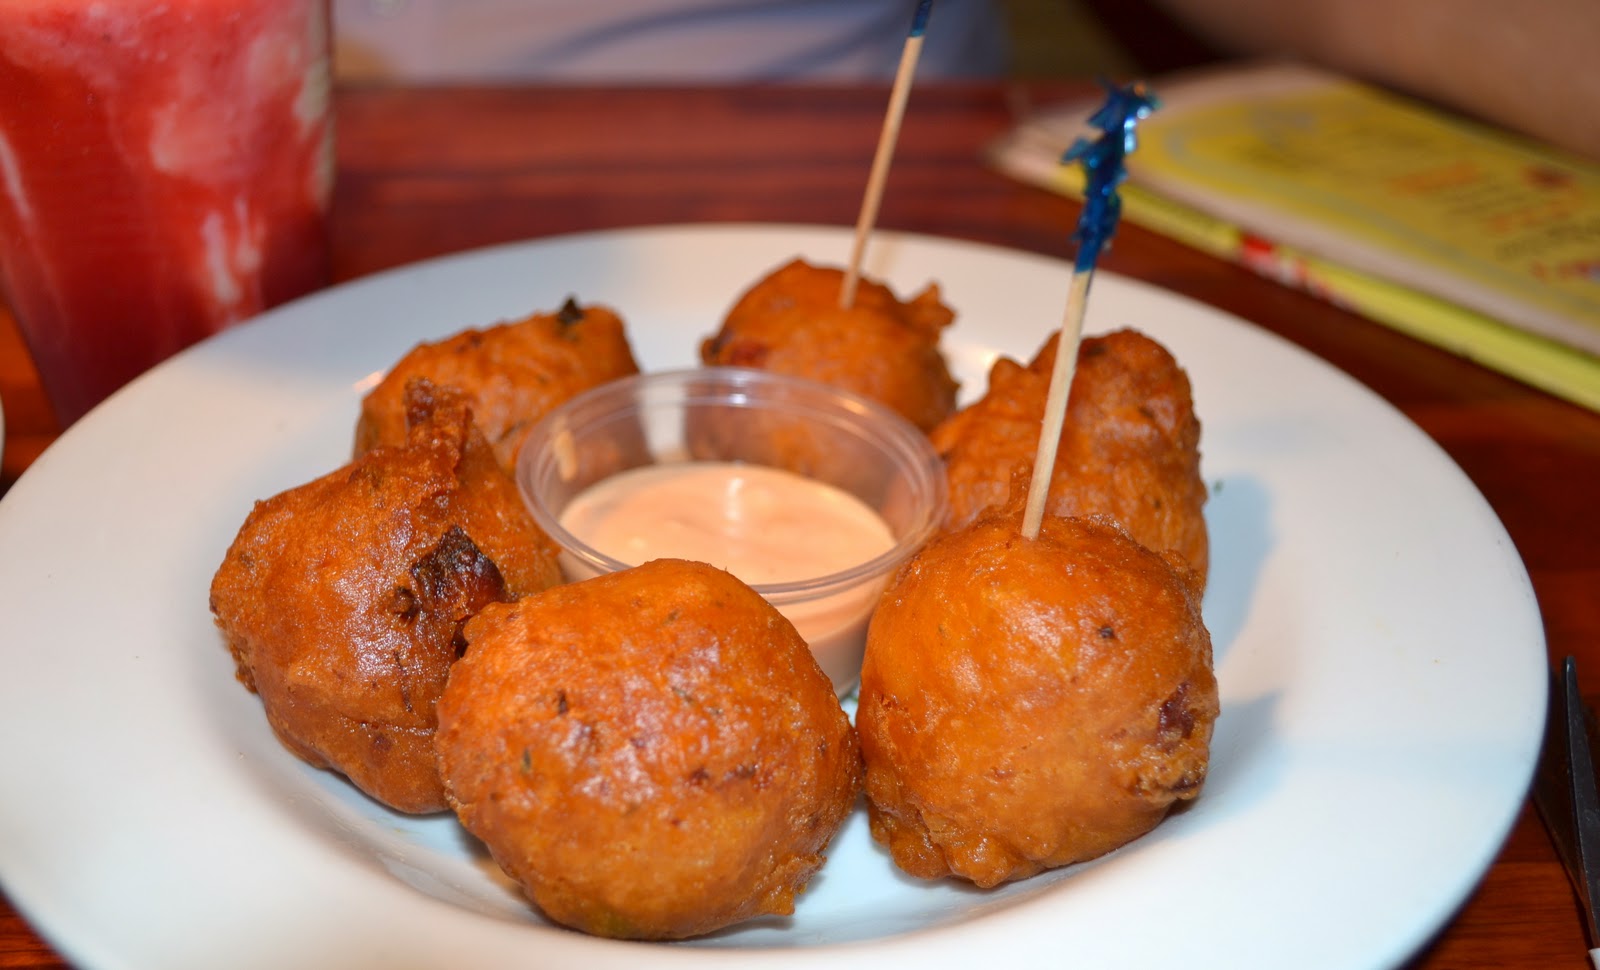 Conch Fritters anyone? The most popular Bahamian appetizer. Bahamian